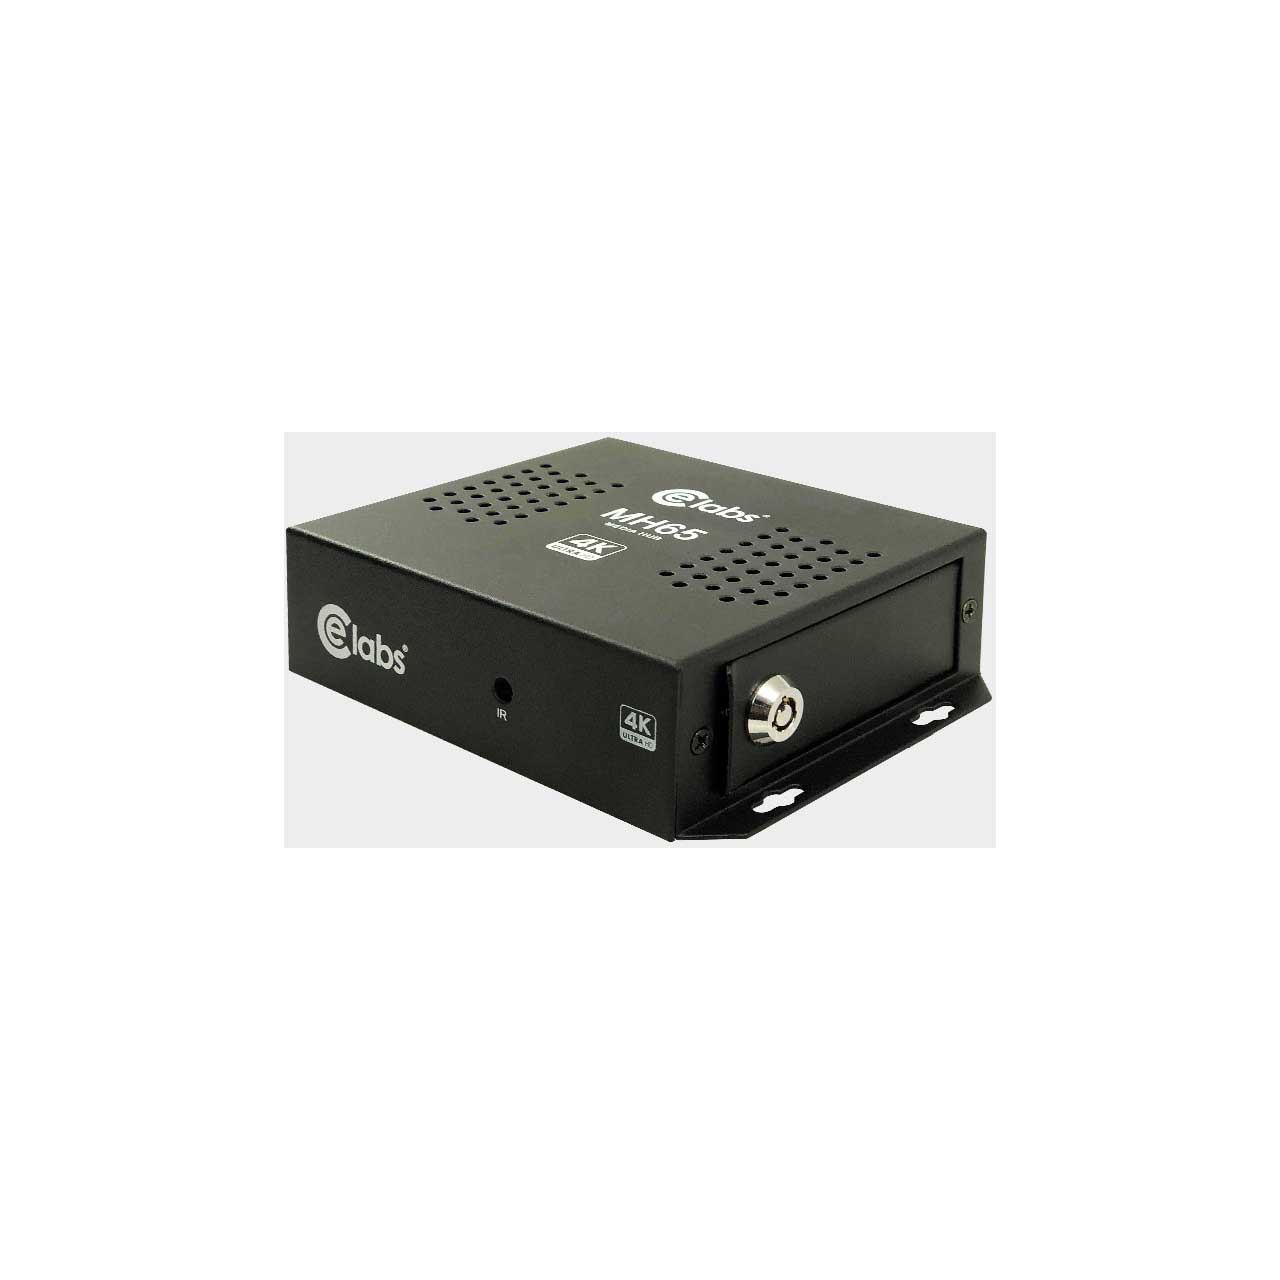 CE Labs MH65 4K USB 3.0/2.0 Media Player for 24/7 Continuous Play of UHD Video and Graphics